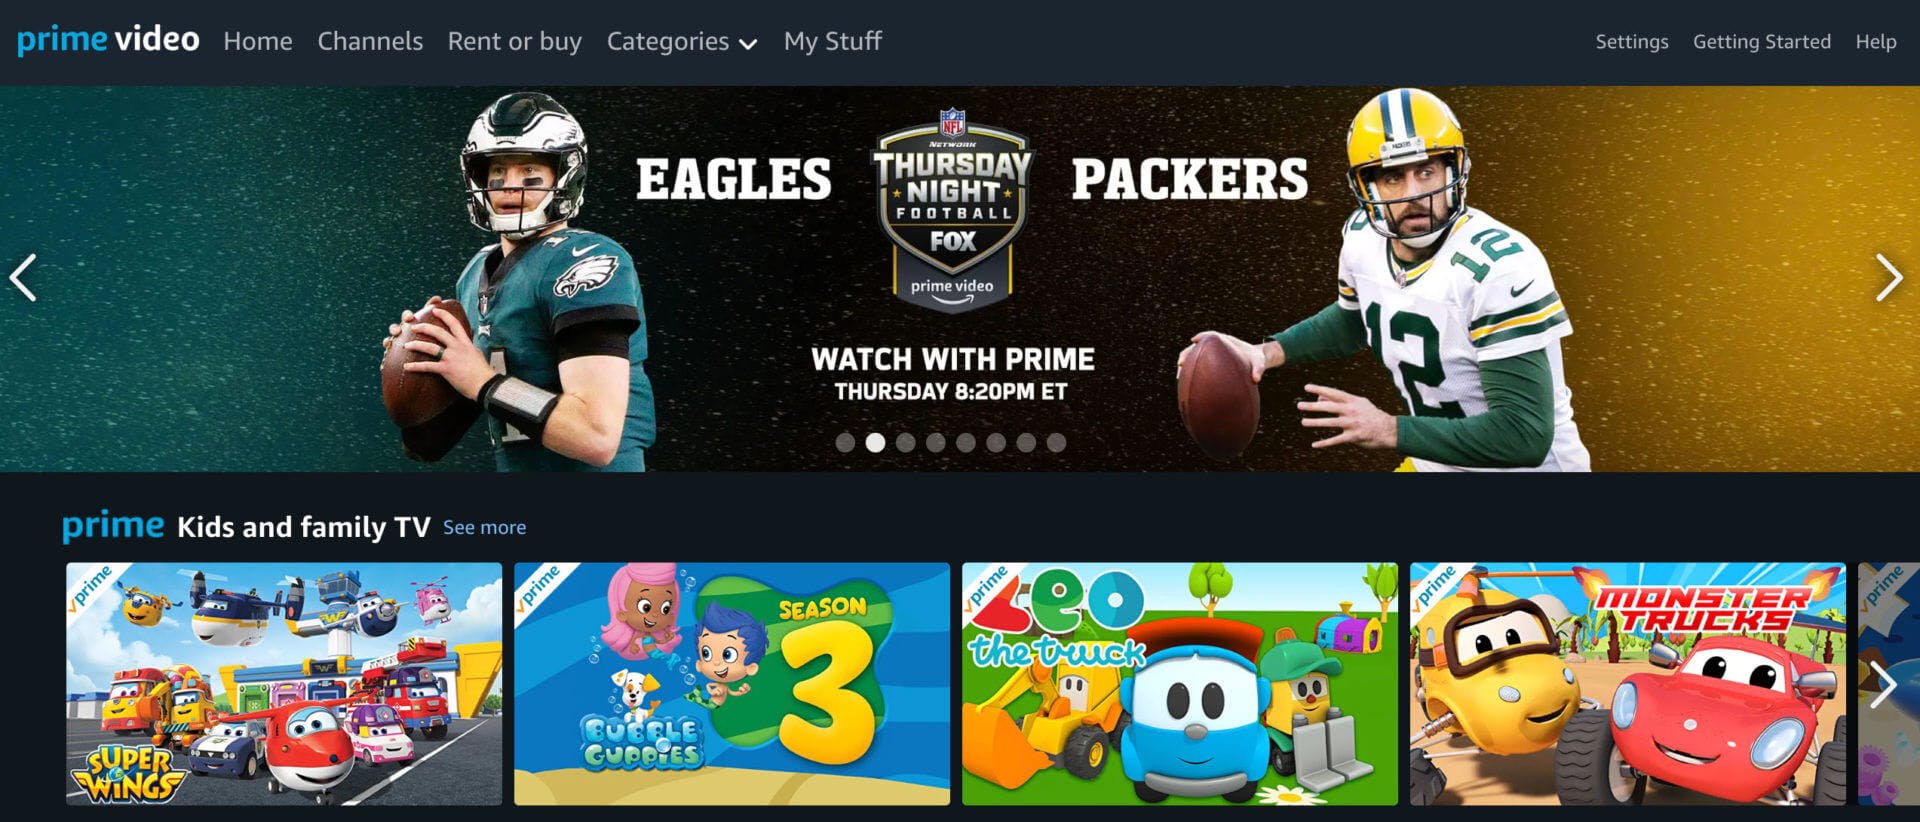 how-to-watch eagles vs packers live stream amazon prime video